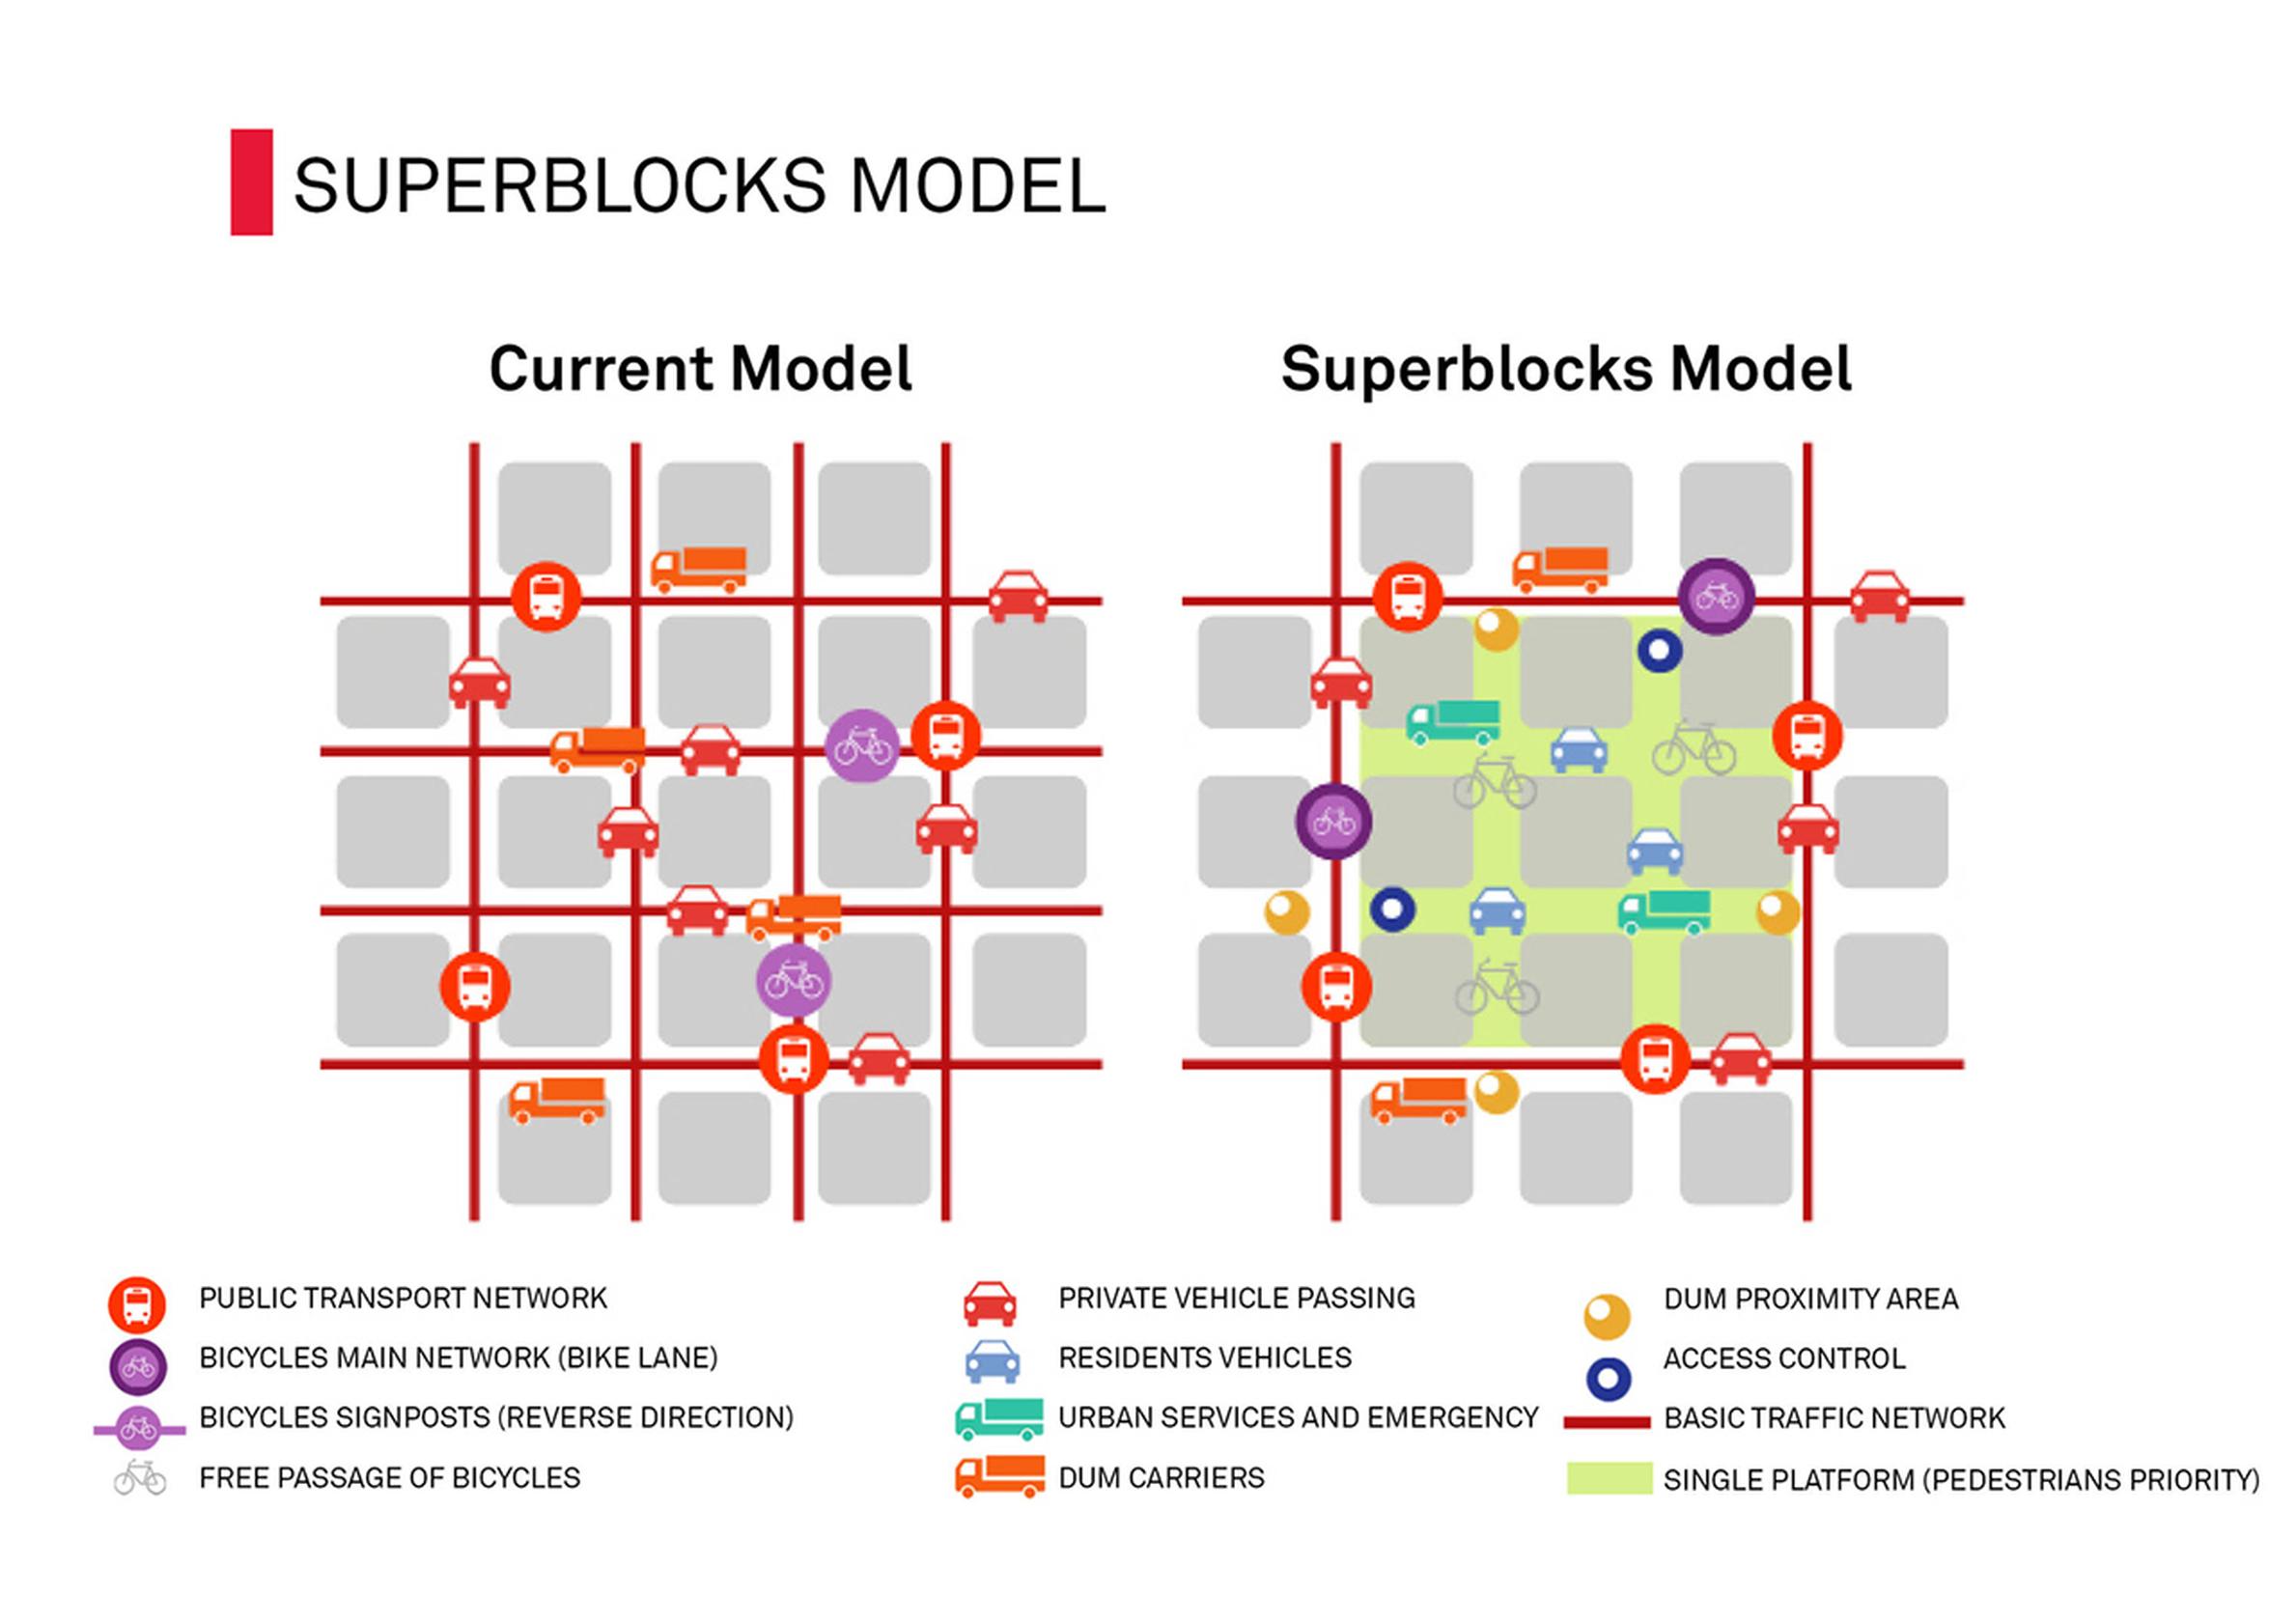 Barcelona’s superblocks are focused on neighbourhoods of nine blocks, with traffic restricted to roads around the outside. It’s one approach supporting the idea of 15 minute centres, and focused on local commerce, supporting affordable housing and boosting public transport as well as active streets